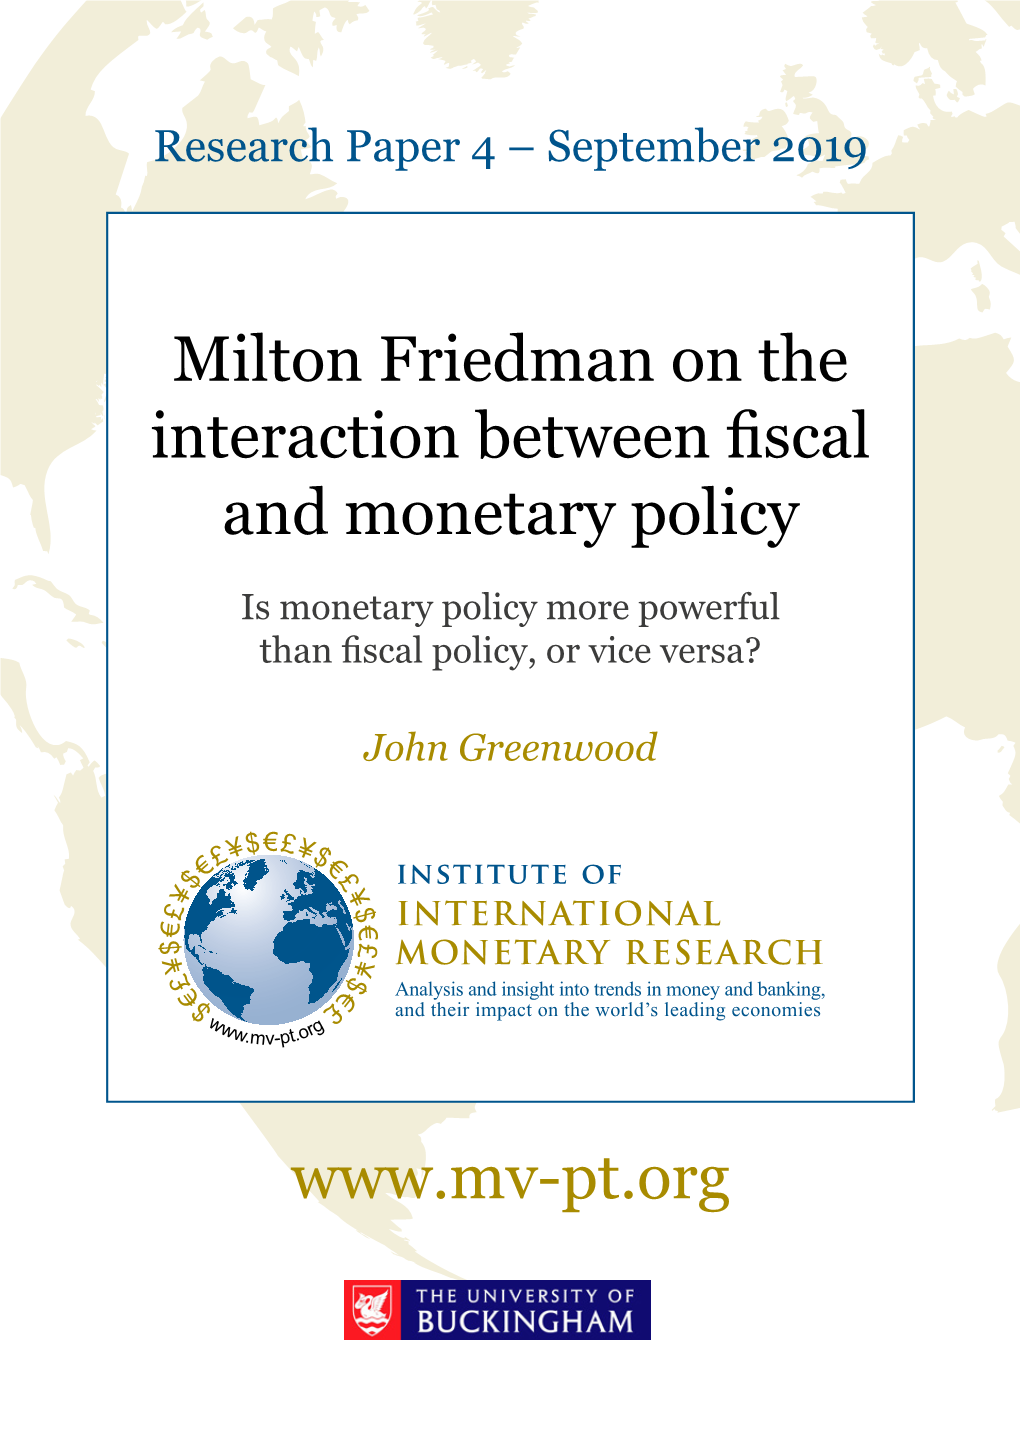 Milton Friedman on the Interaction Between Fiscal and Monetary Policy